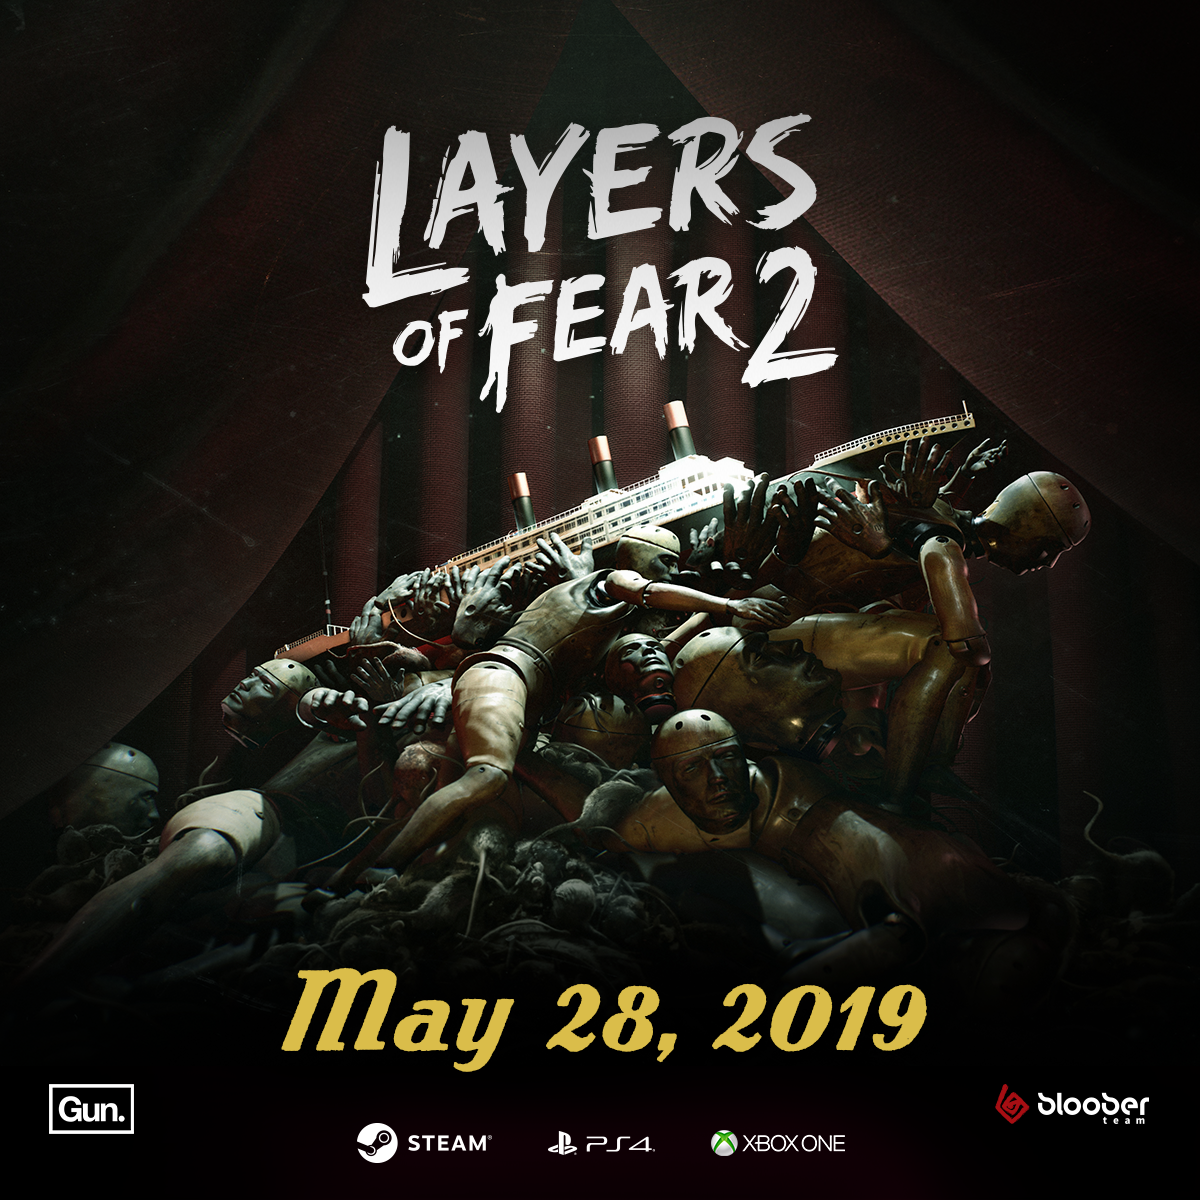 Haast je Grap Vlot Layers of Fear 2 Release Date Announcement | Newswire